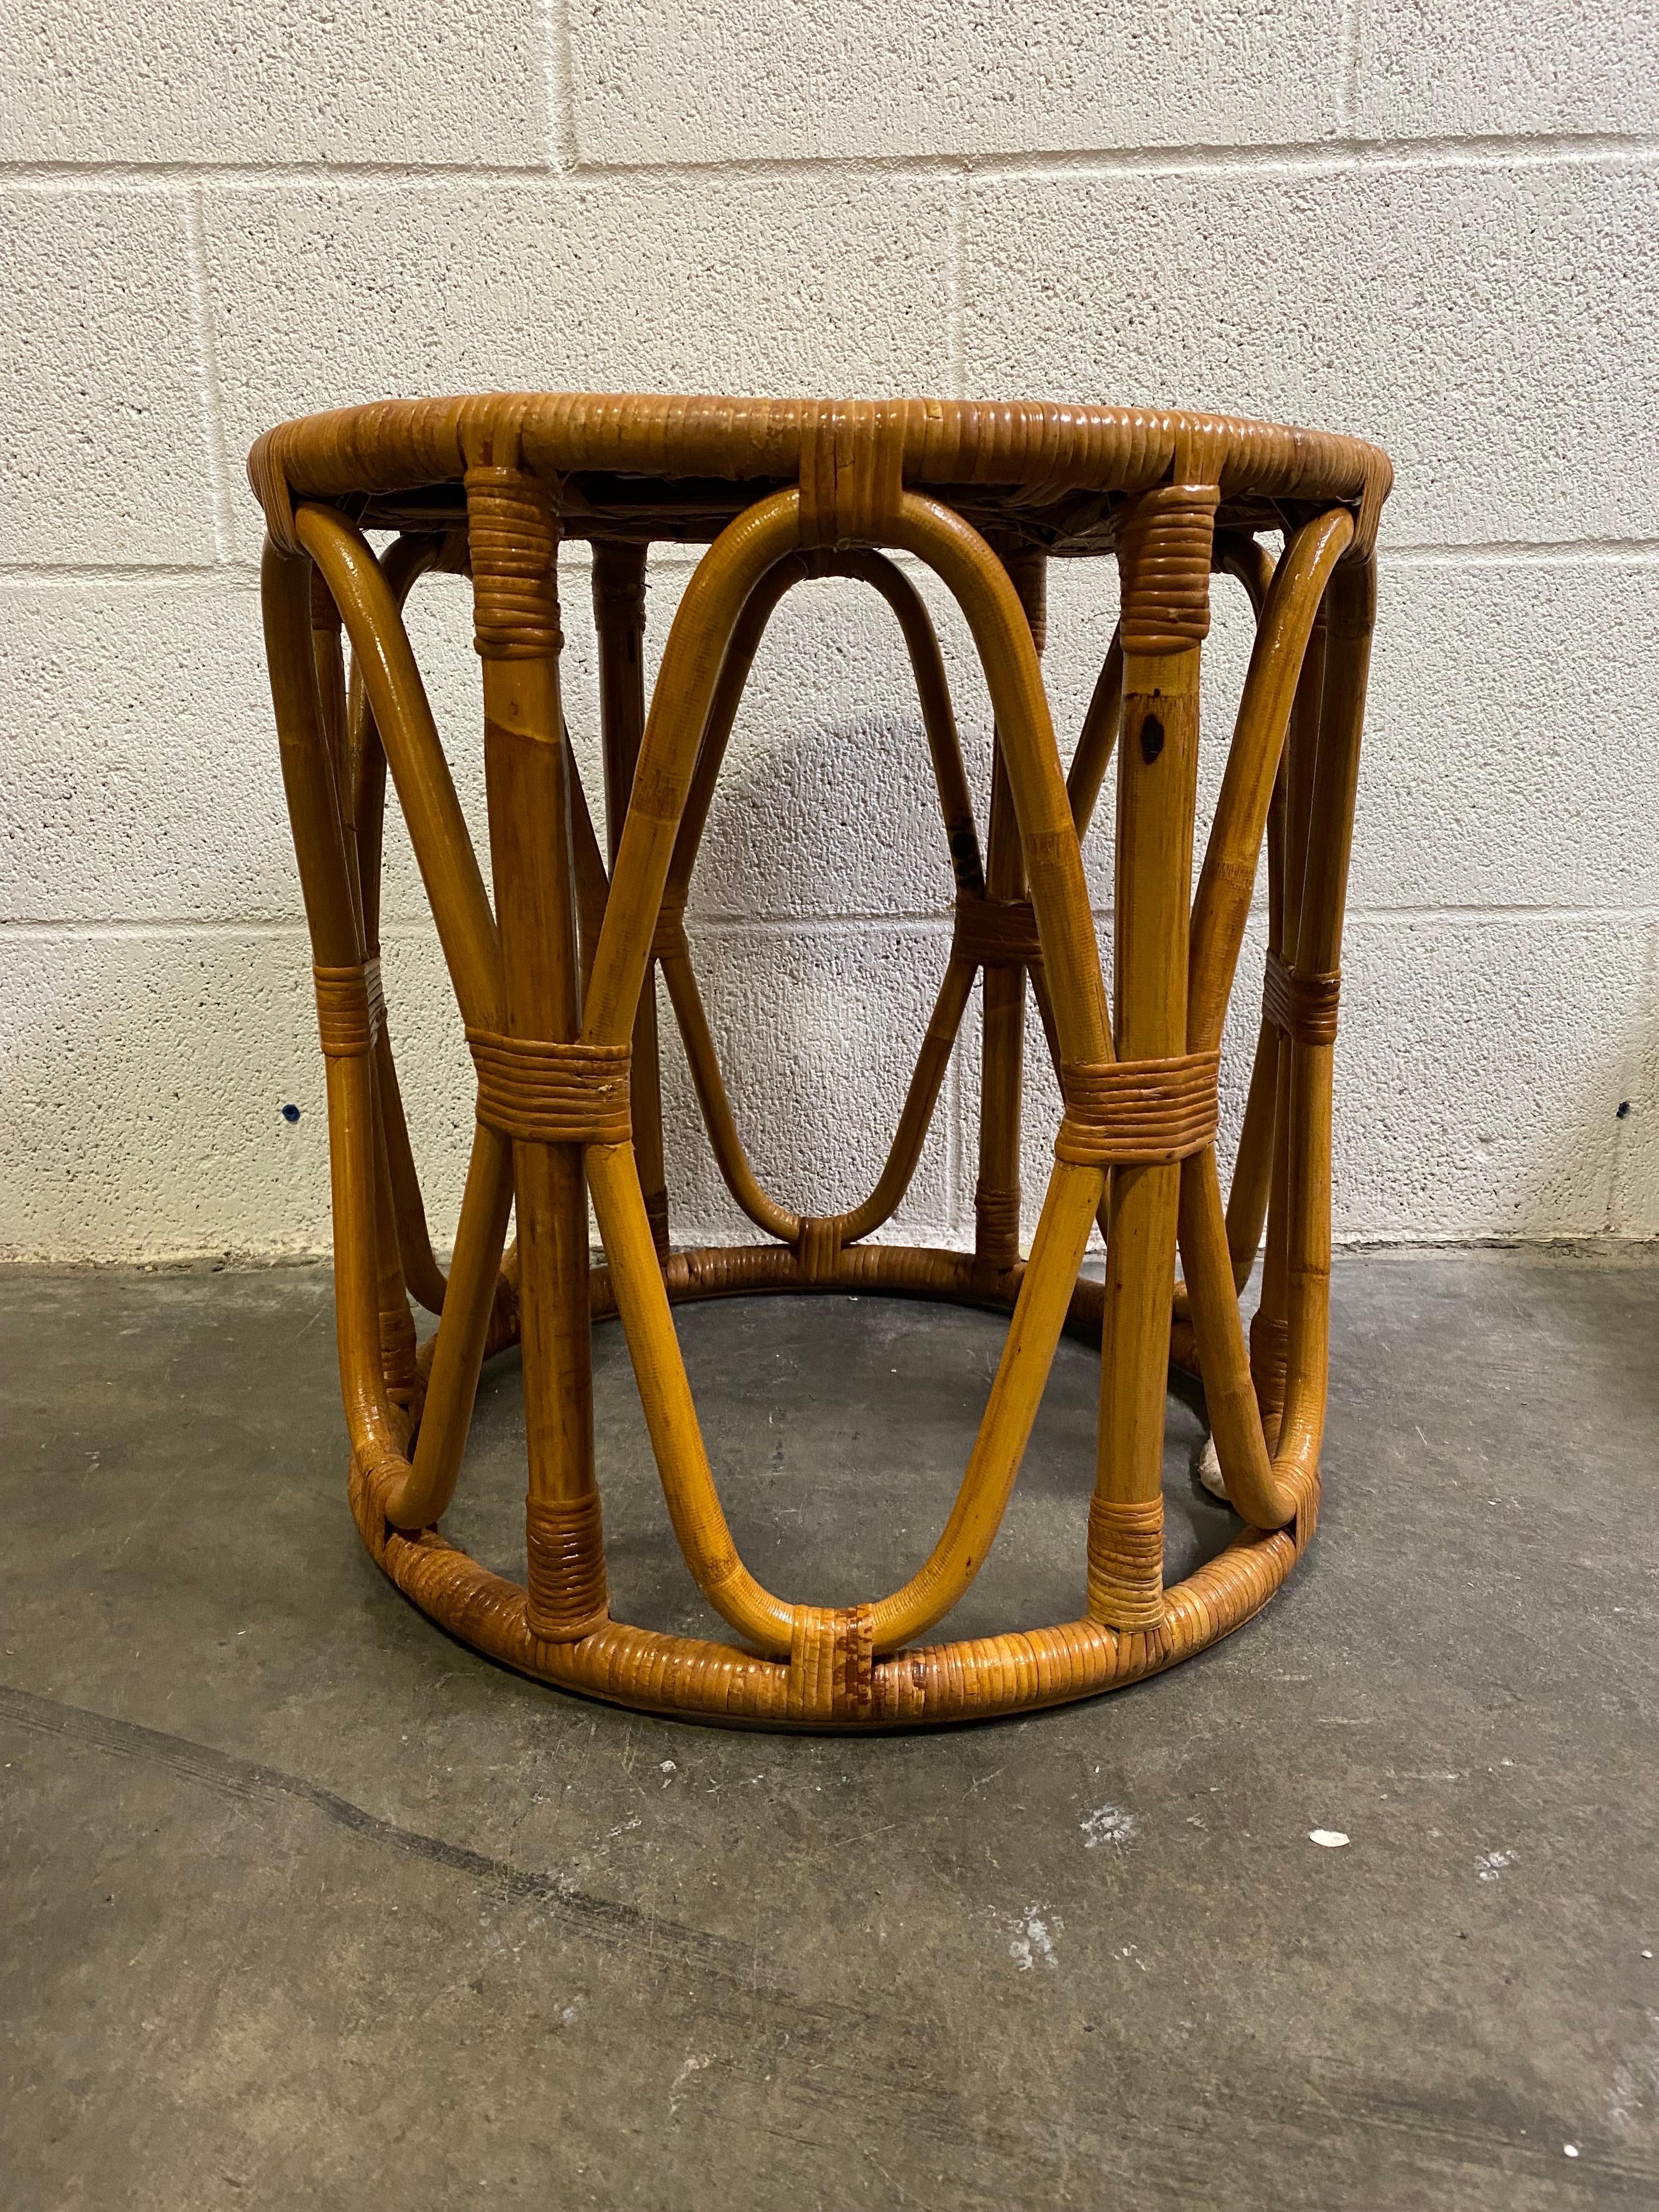 For sale we have a 1970s vintage tiki style or boho chic Mid-Century Modern rattan and bamboo side table which can also perfectly used as a stool or plant stand. This will add a great mid century boho accent to any room or space.

Structurally in